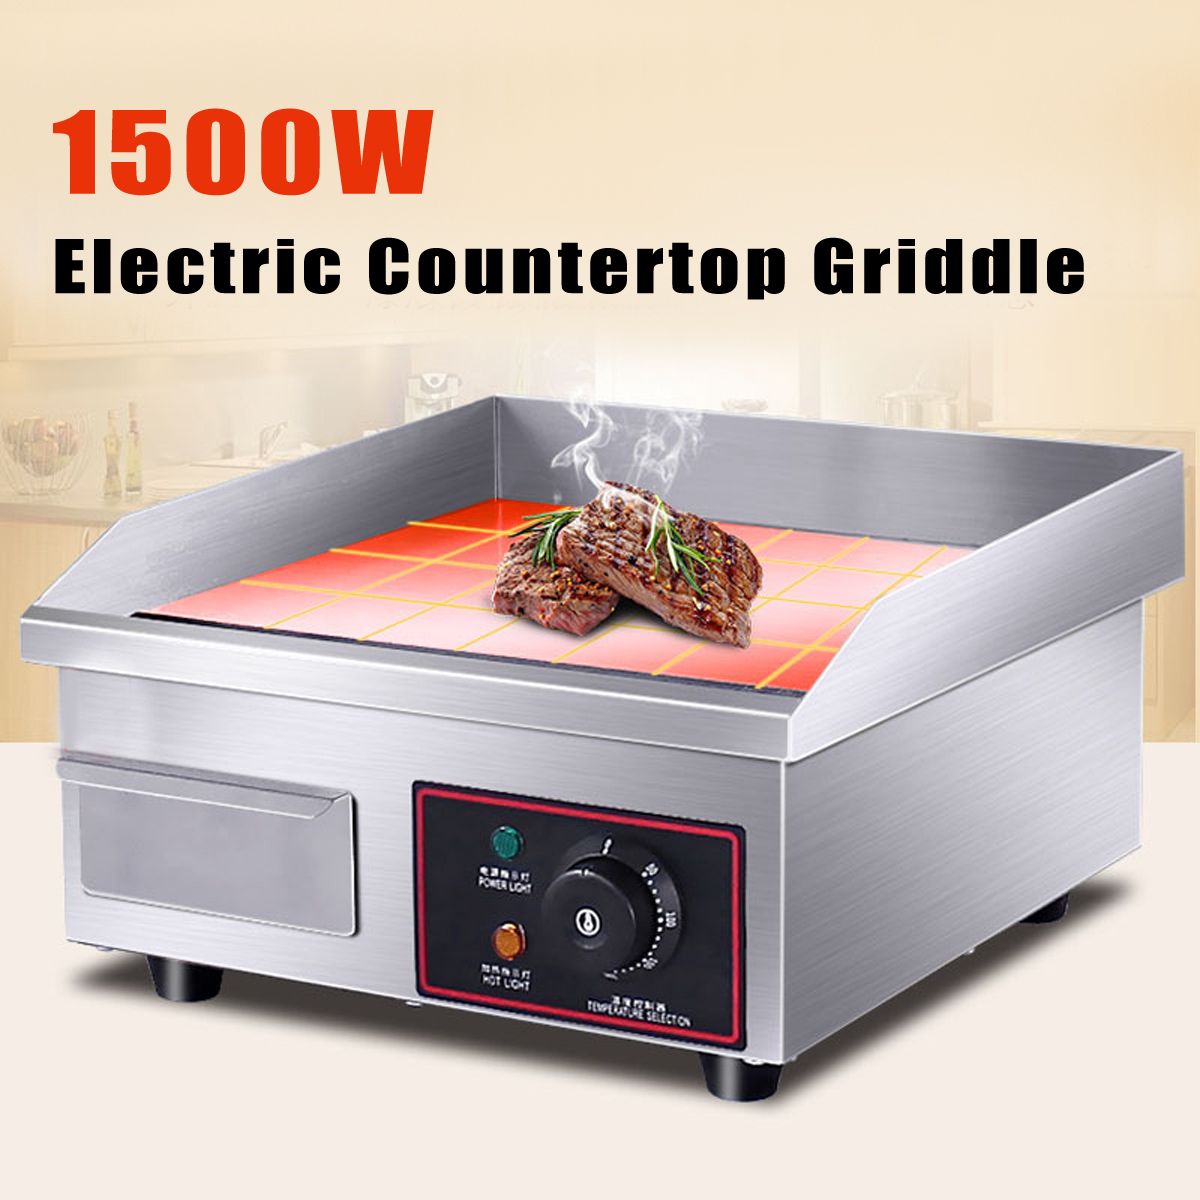 1500W-110V-Electric-Countertop-Griddle-Commercial-Restaurant-Flat-Top-Grill-BBQ-1334353